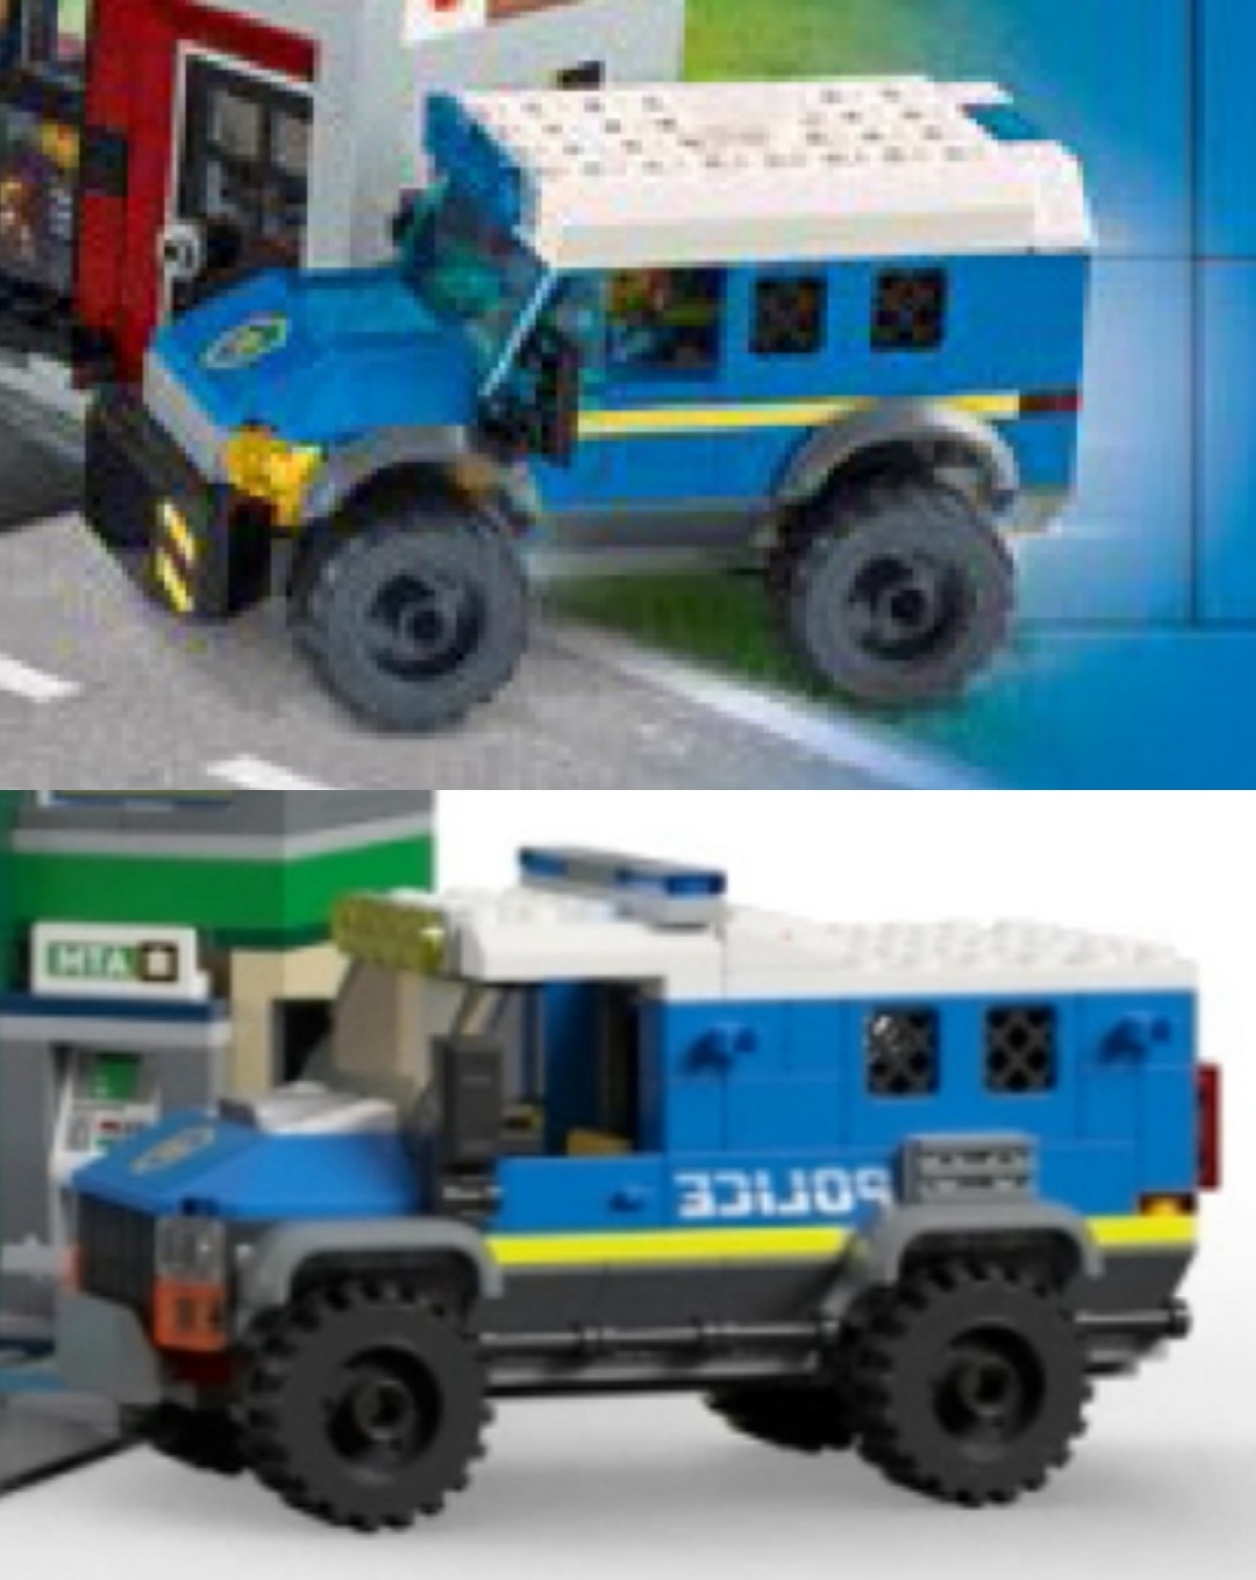 Lego Train City Armour Bank Cash Truck Security Van from Cargo